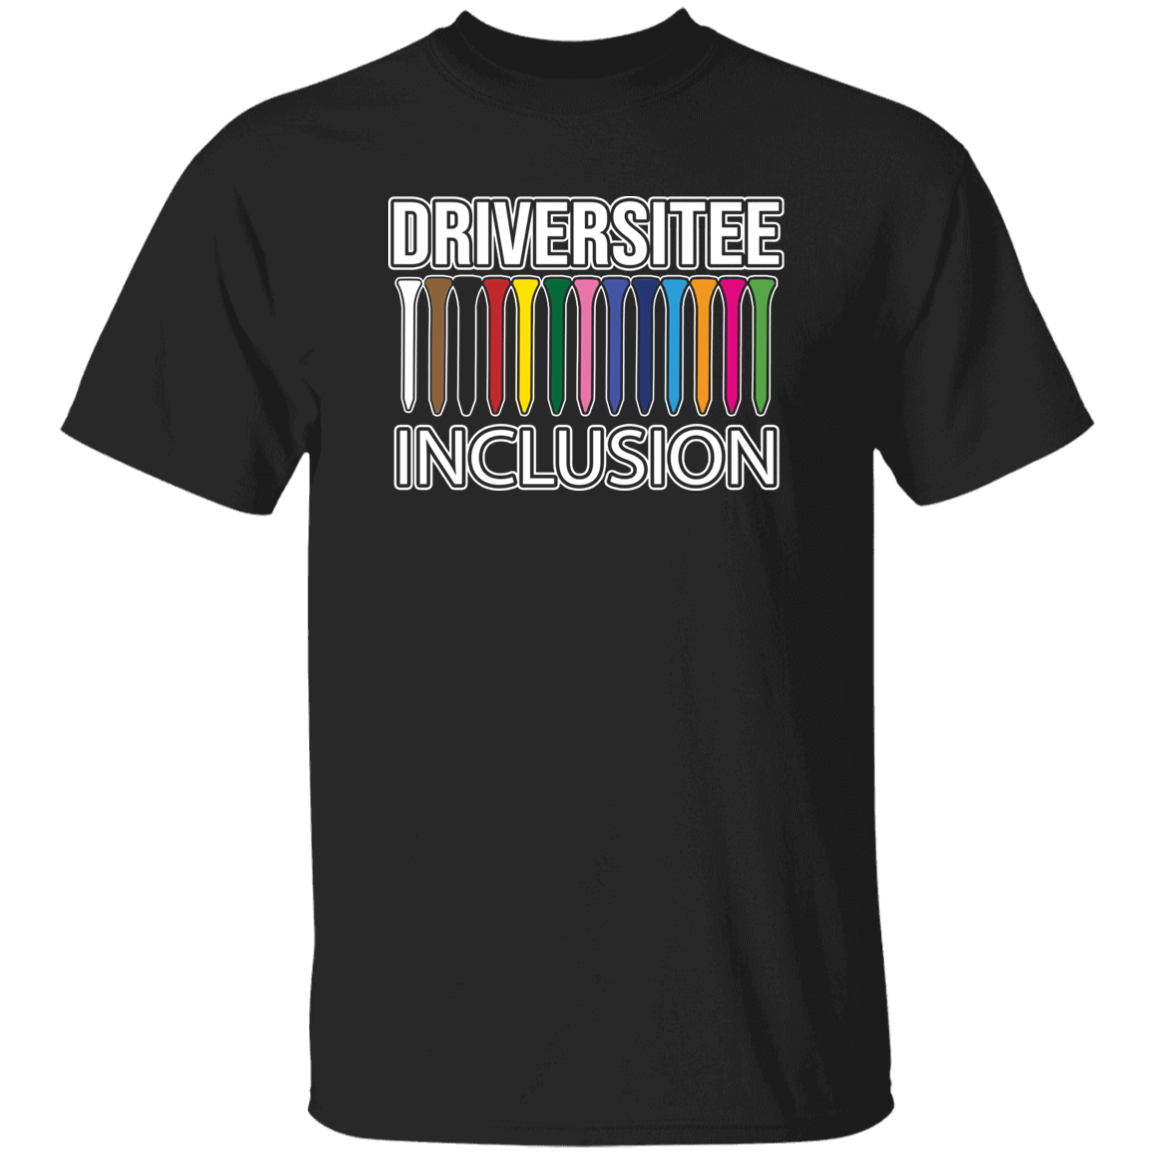 ZZZ#06 OPG Custom Design. DRIVER-SITEE & INCLUSION. Youth 100% Cotton T-Shirt